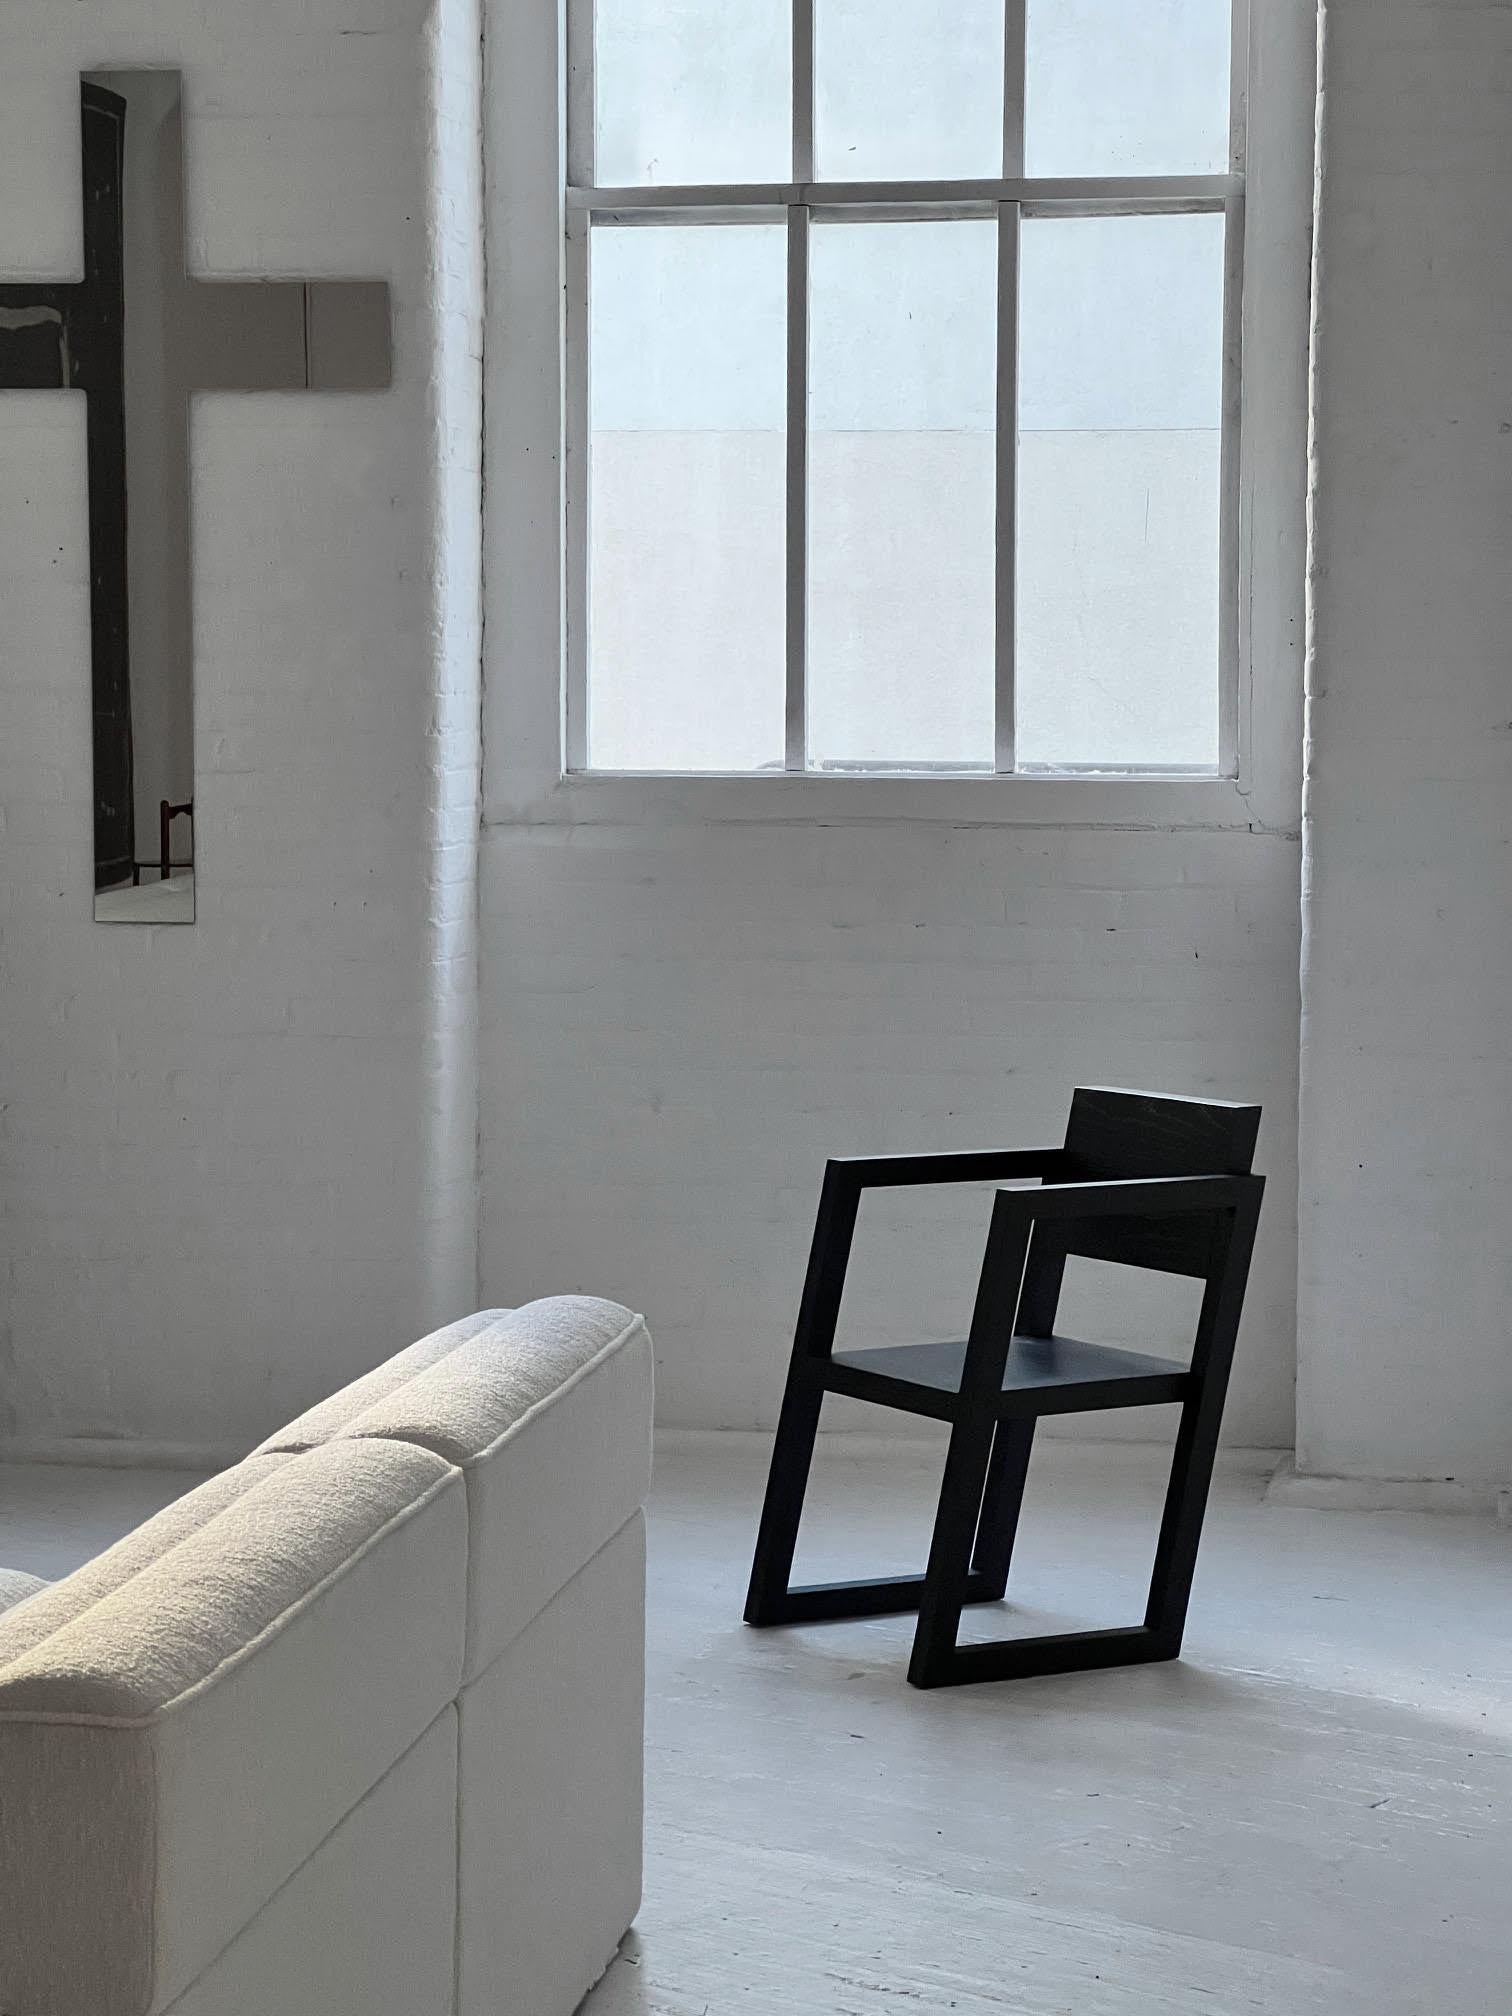 Duplex presents The Italic Chair designed by Haris Fazlani, co-founder WØRKS, an award-winning creative studio based in New York City.

THE ITALIC CHAIR
The Italic Chair was designed to be a working sculpture, infused with a sense of visual